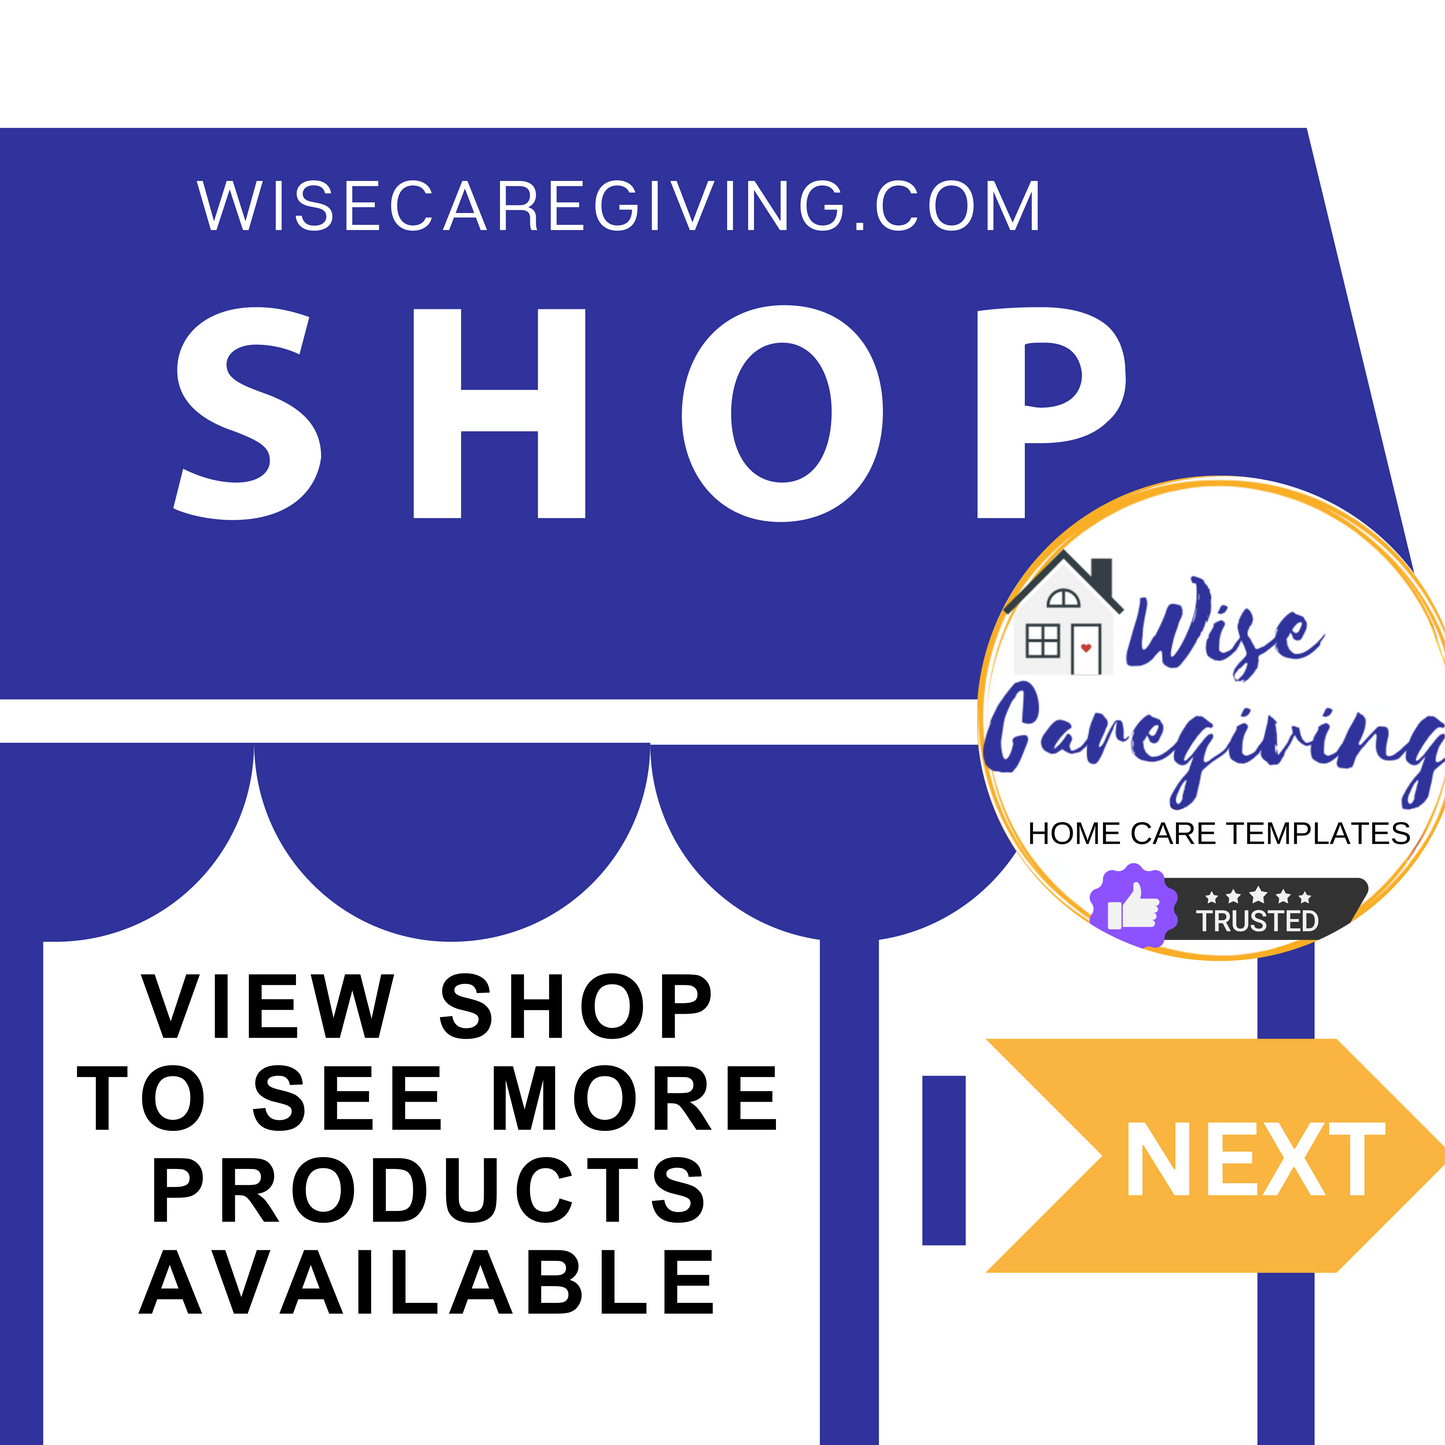 Caregiver Task List and Care Plan for New Home Care Clients